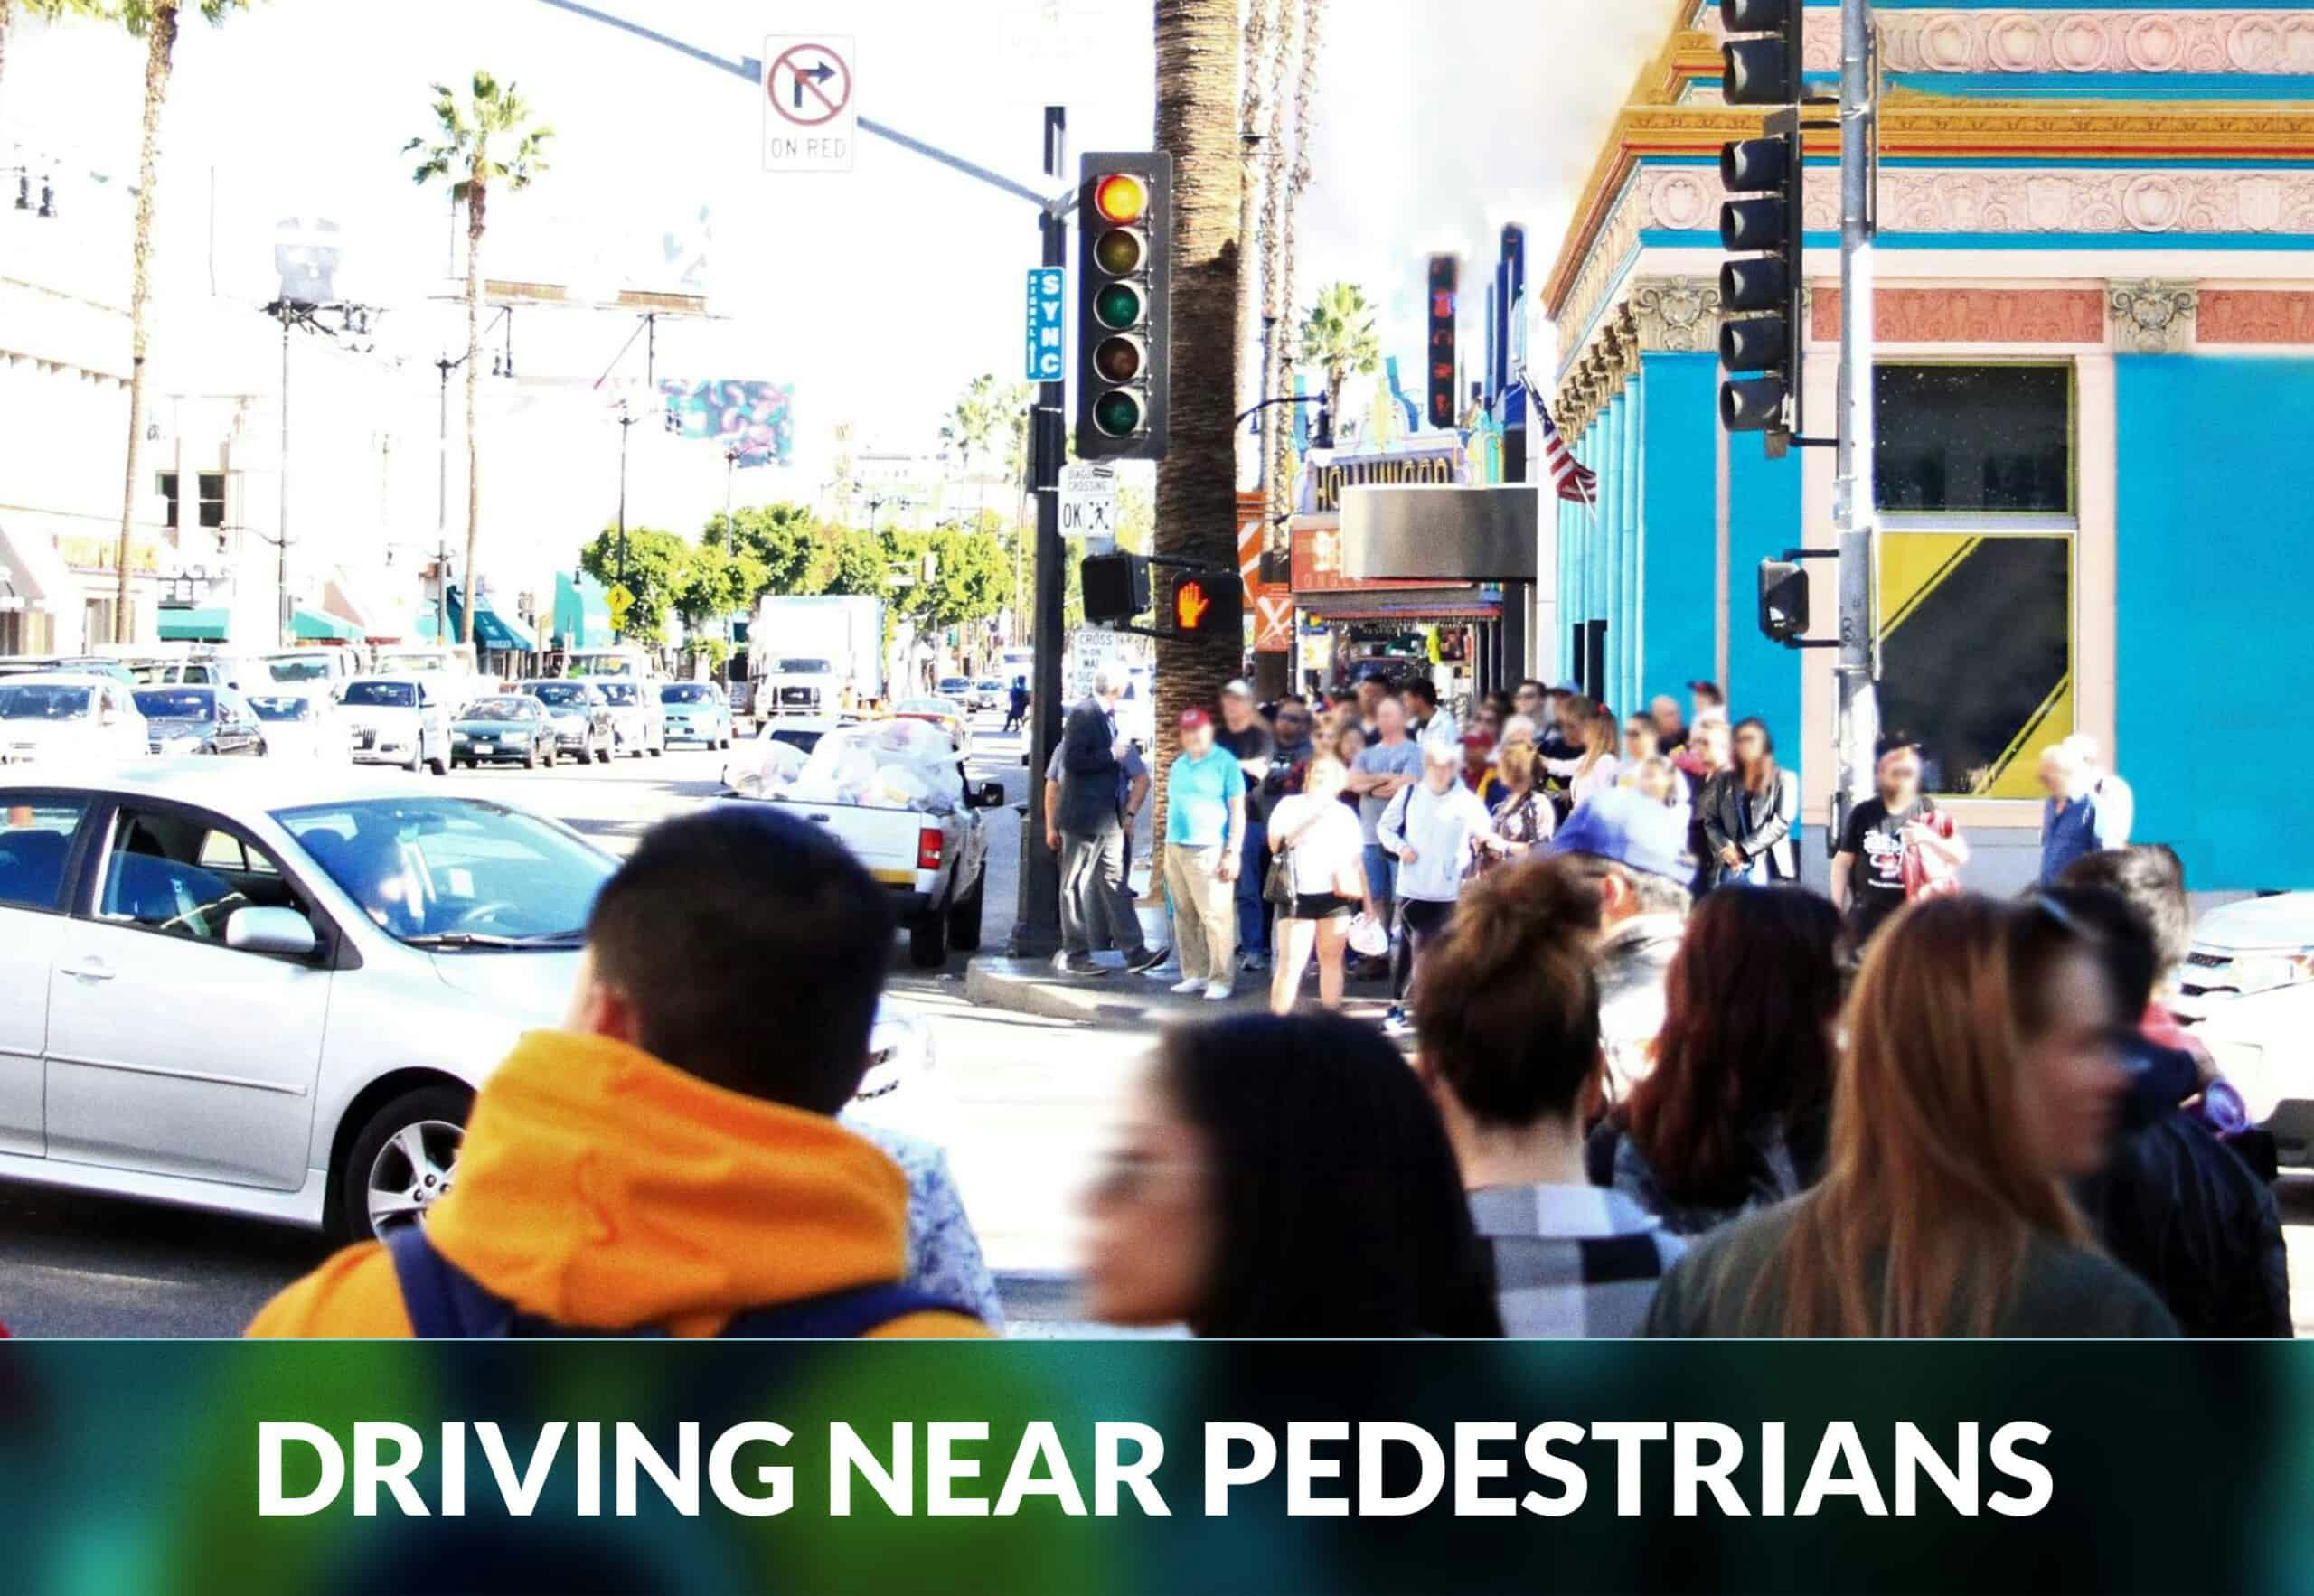 Do drivers have to wait for pedestrians to Cross Street?